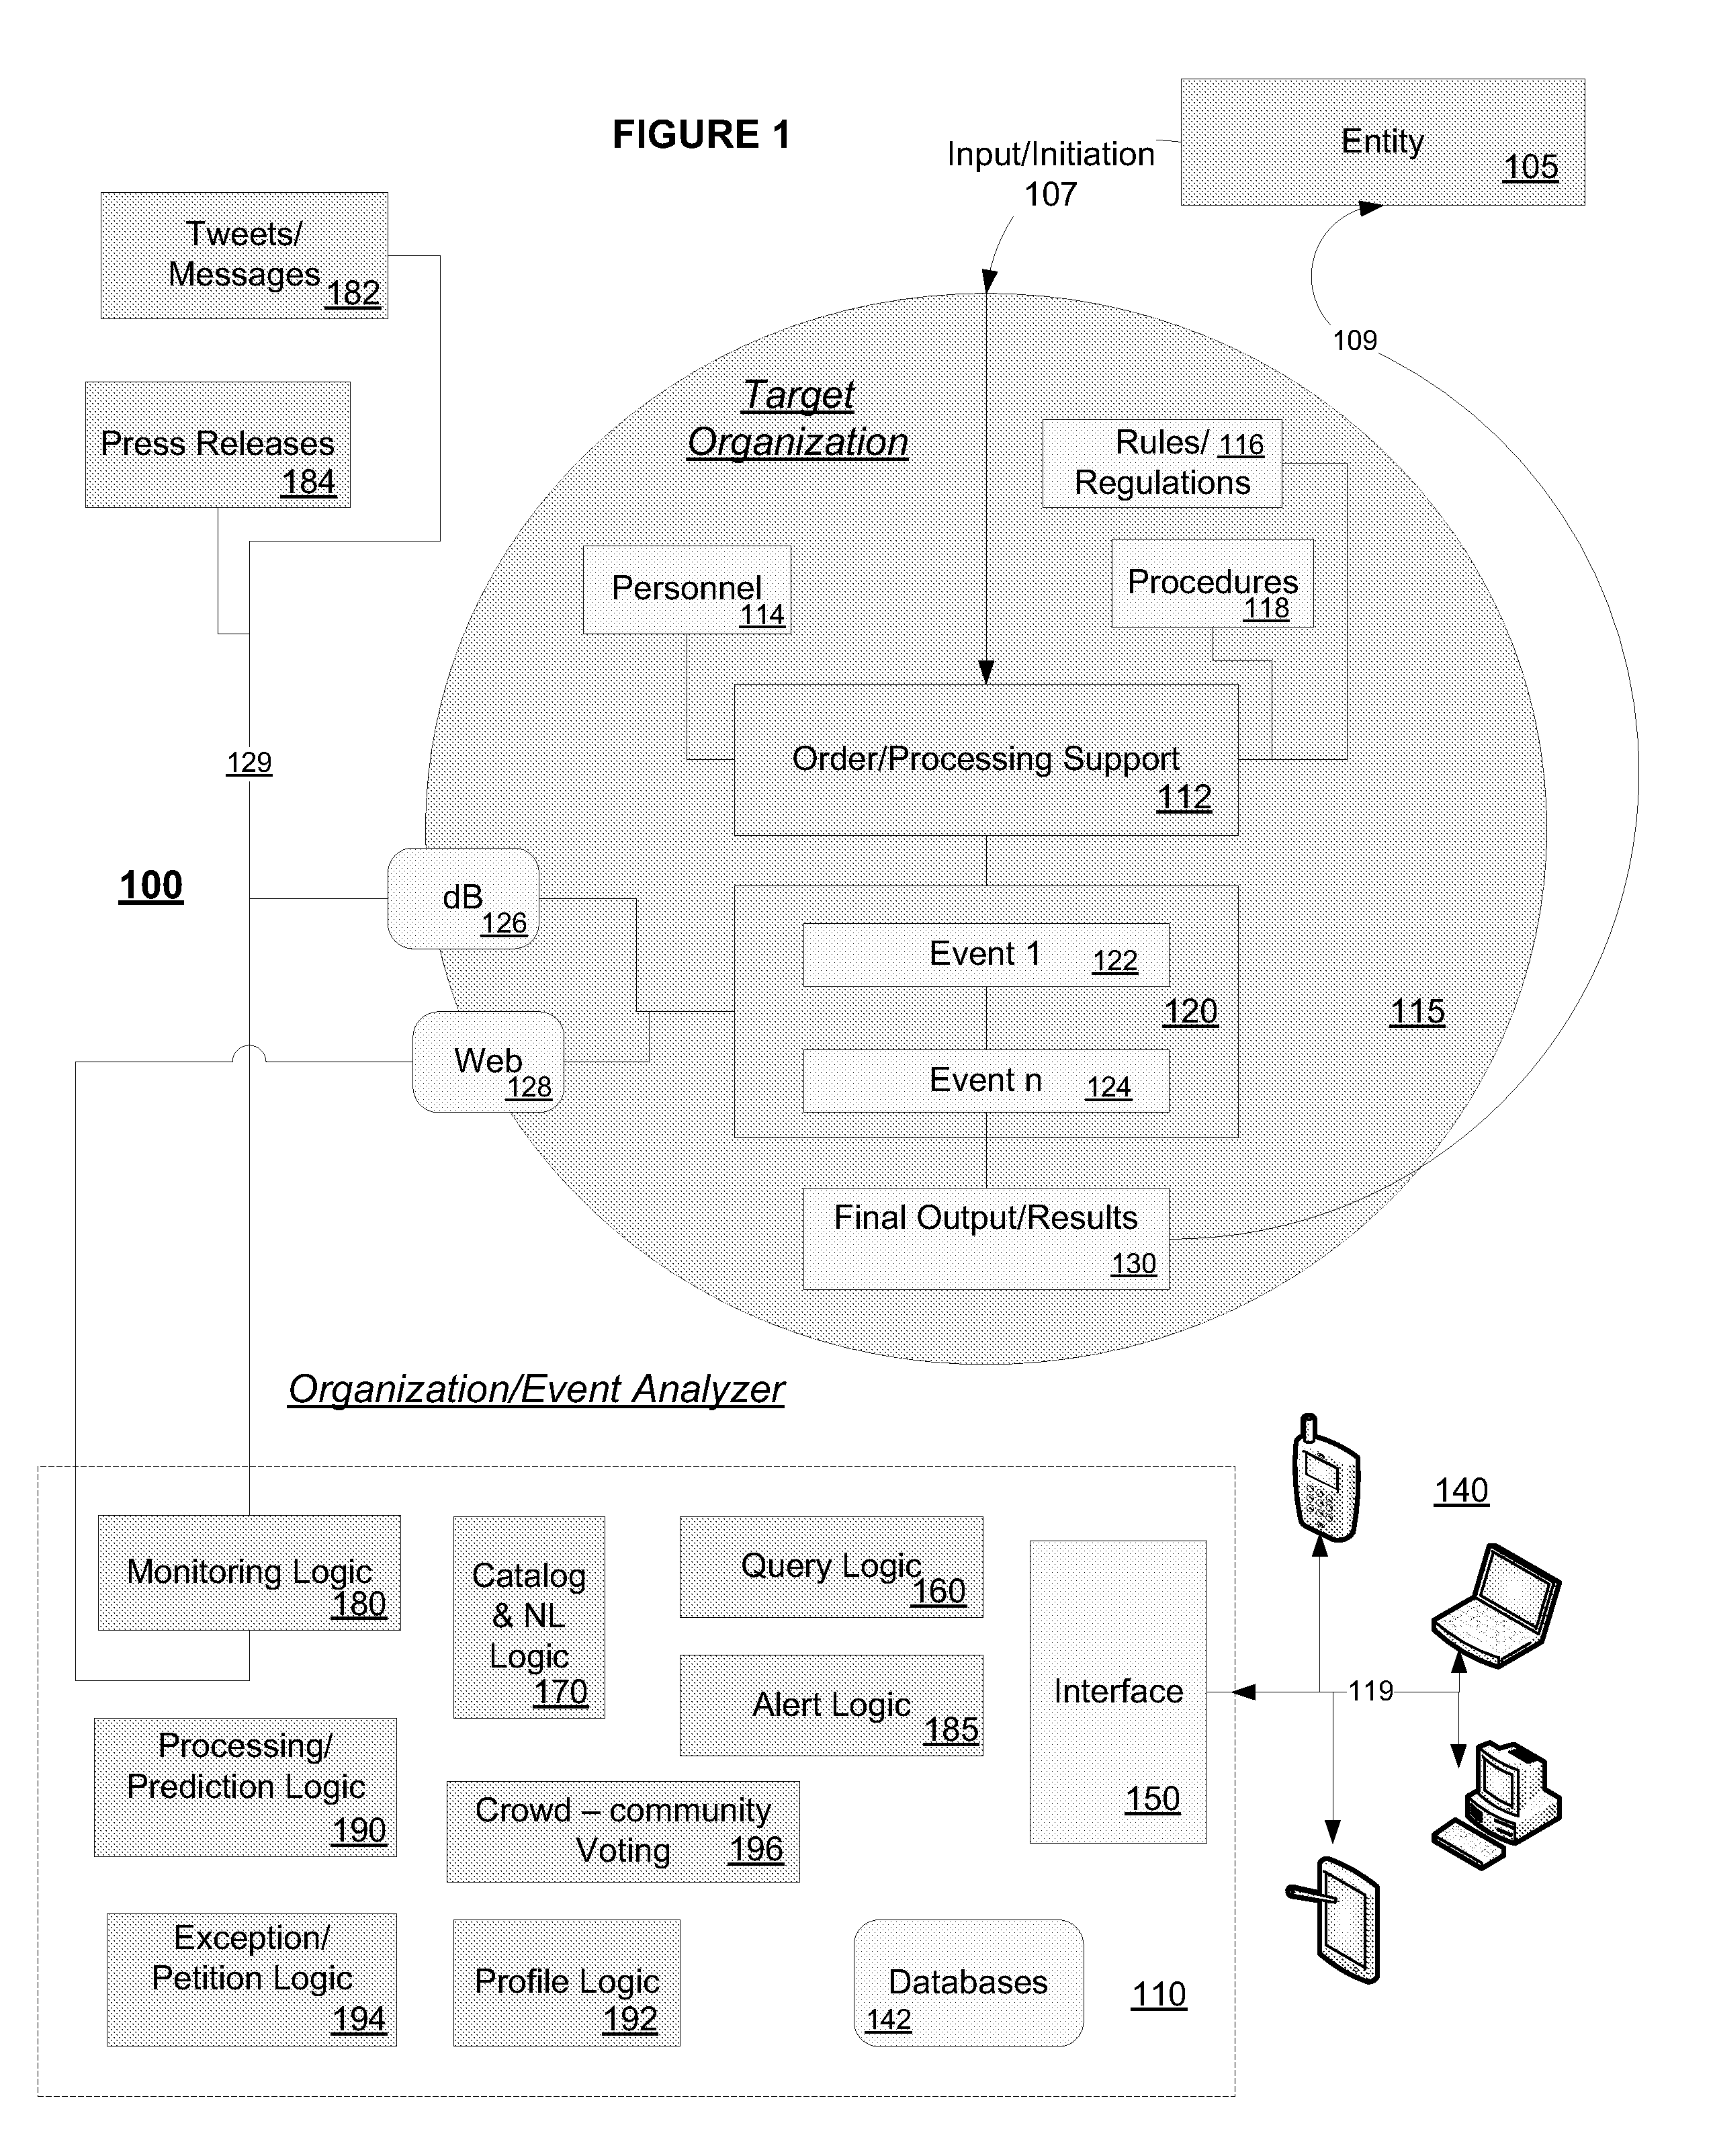 System & Method For Compiling Intellectual Property Asset Data